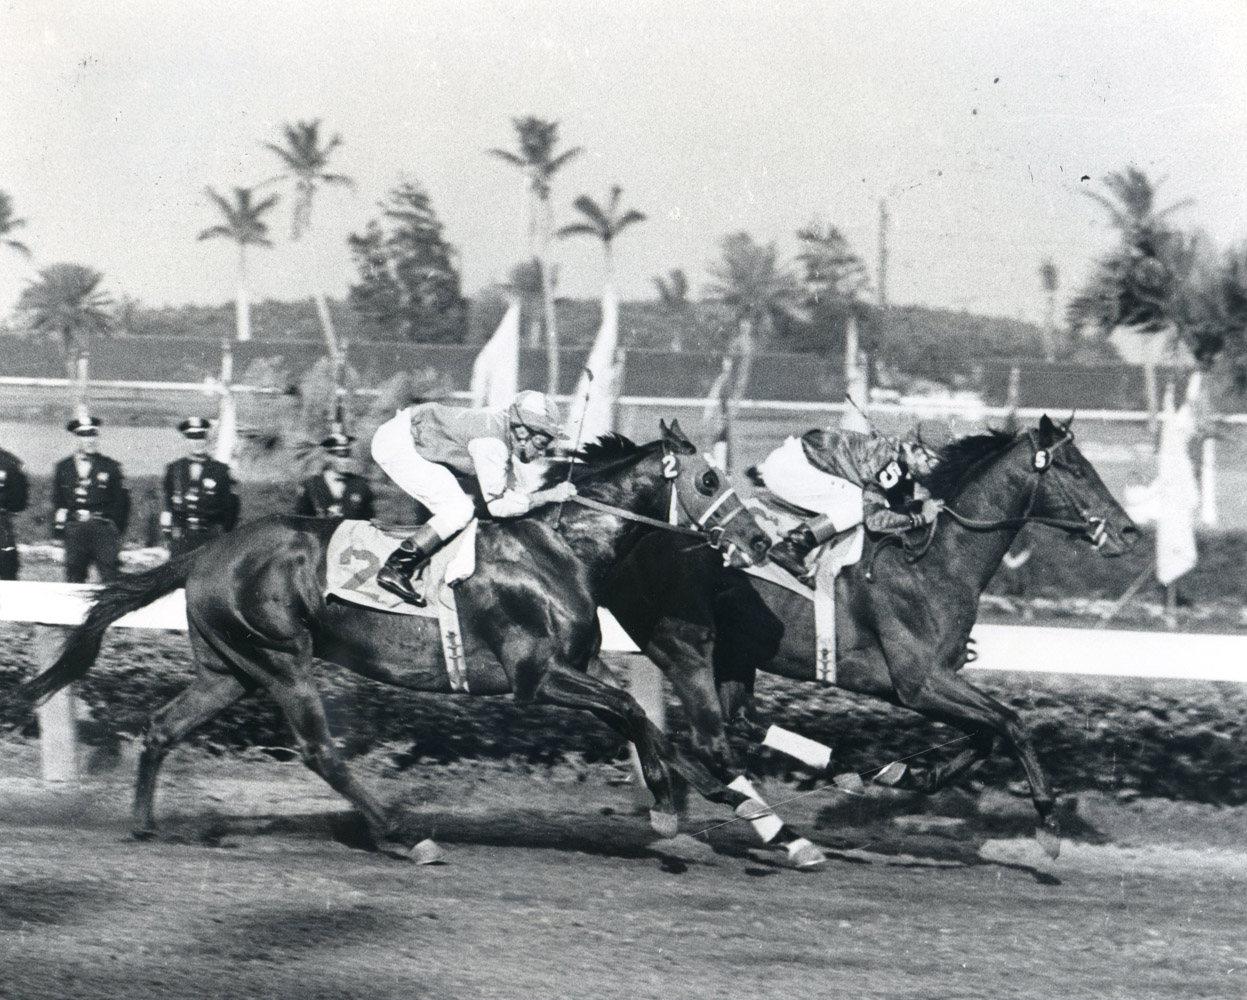 Bill Hartack and Tim Tam winning the 1958 Florida Derby at Gulfstream Park (Jim Raftery Turfotos/Museum Collection)